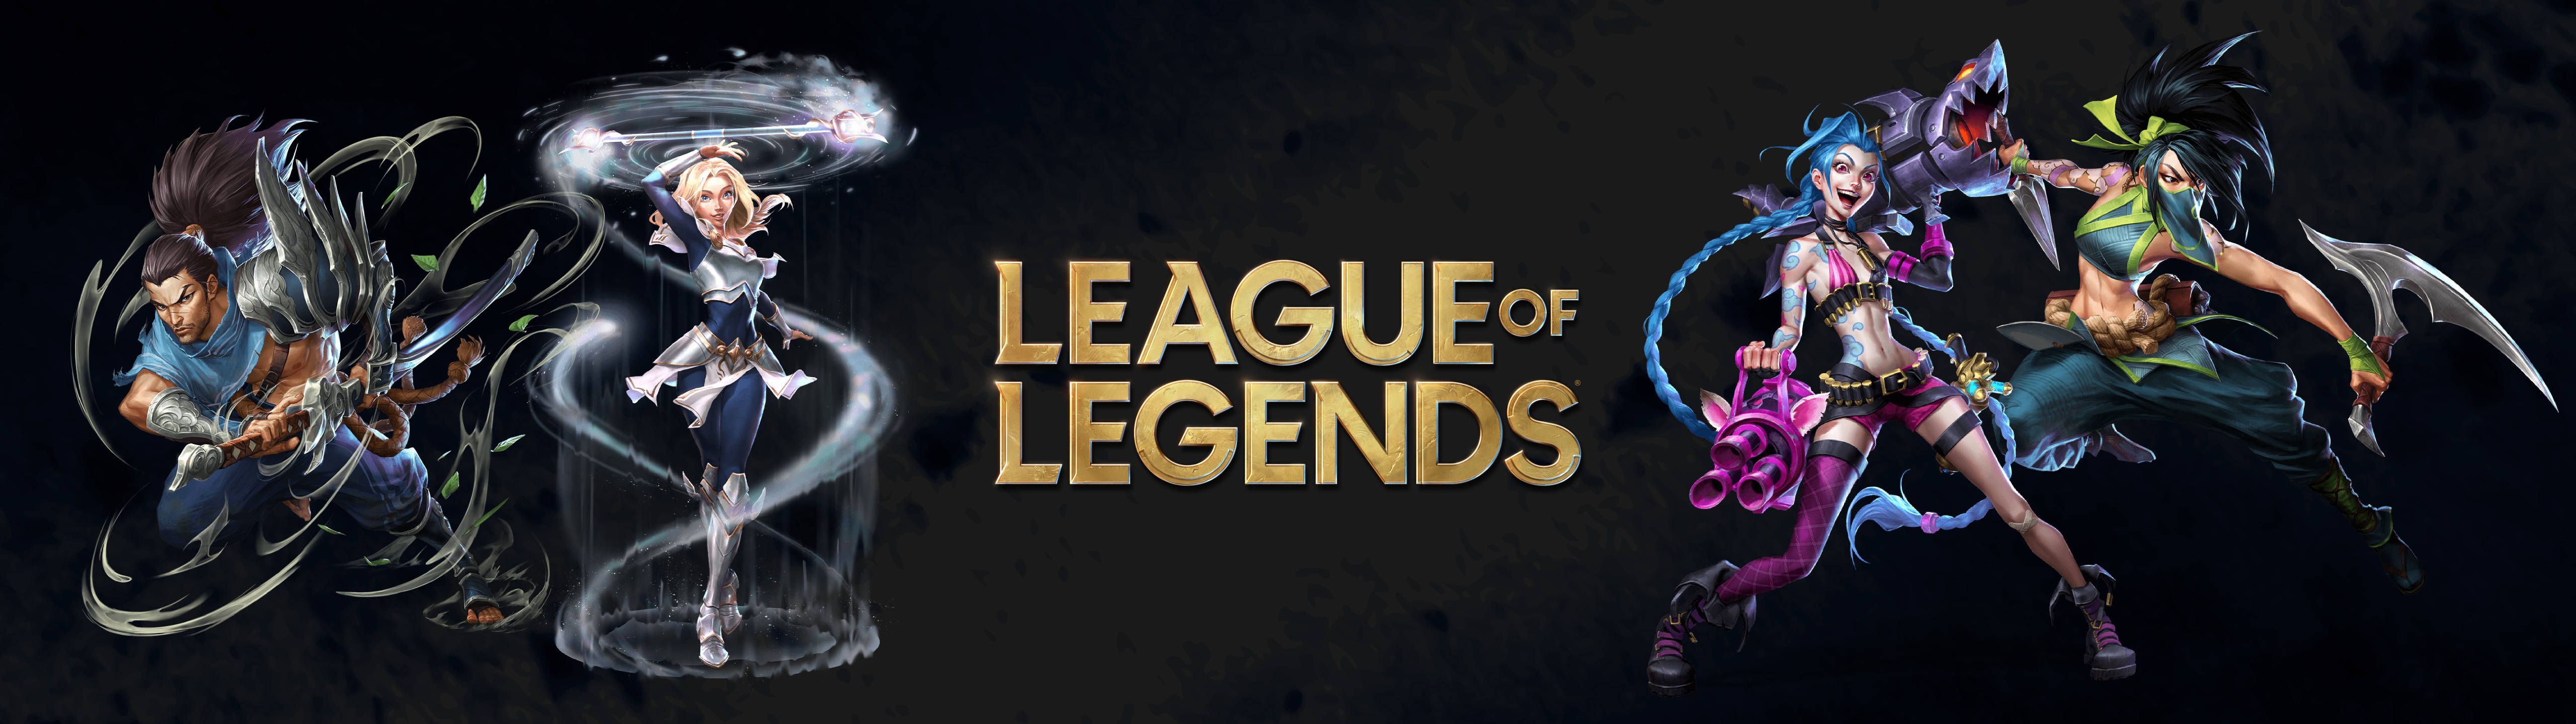 A League of Legends wallpaper featuring all champions from the game - 5120x1440